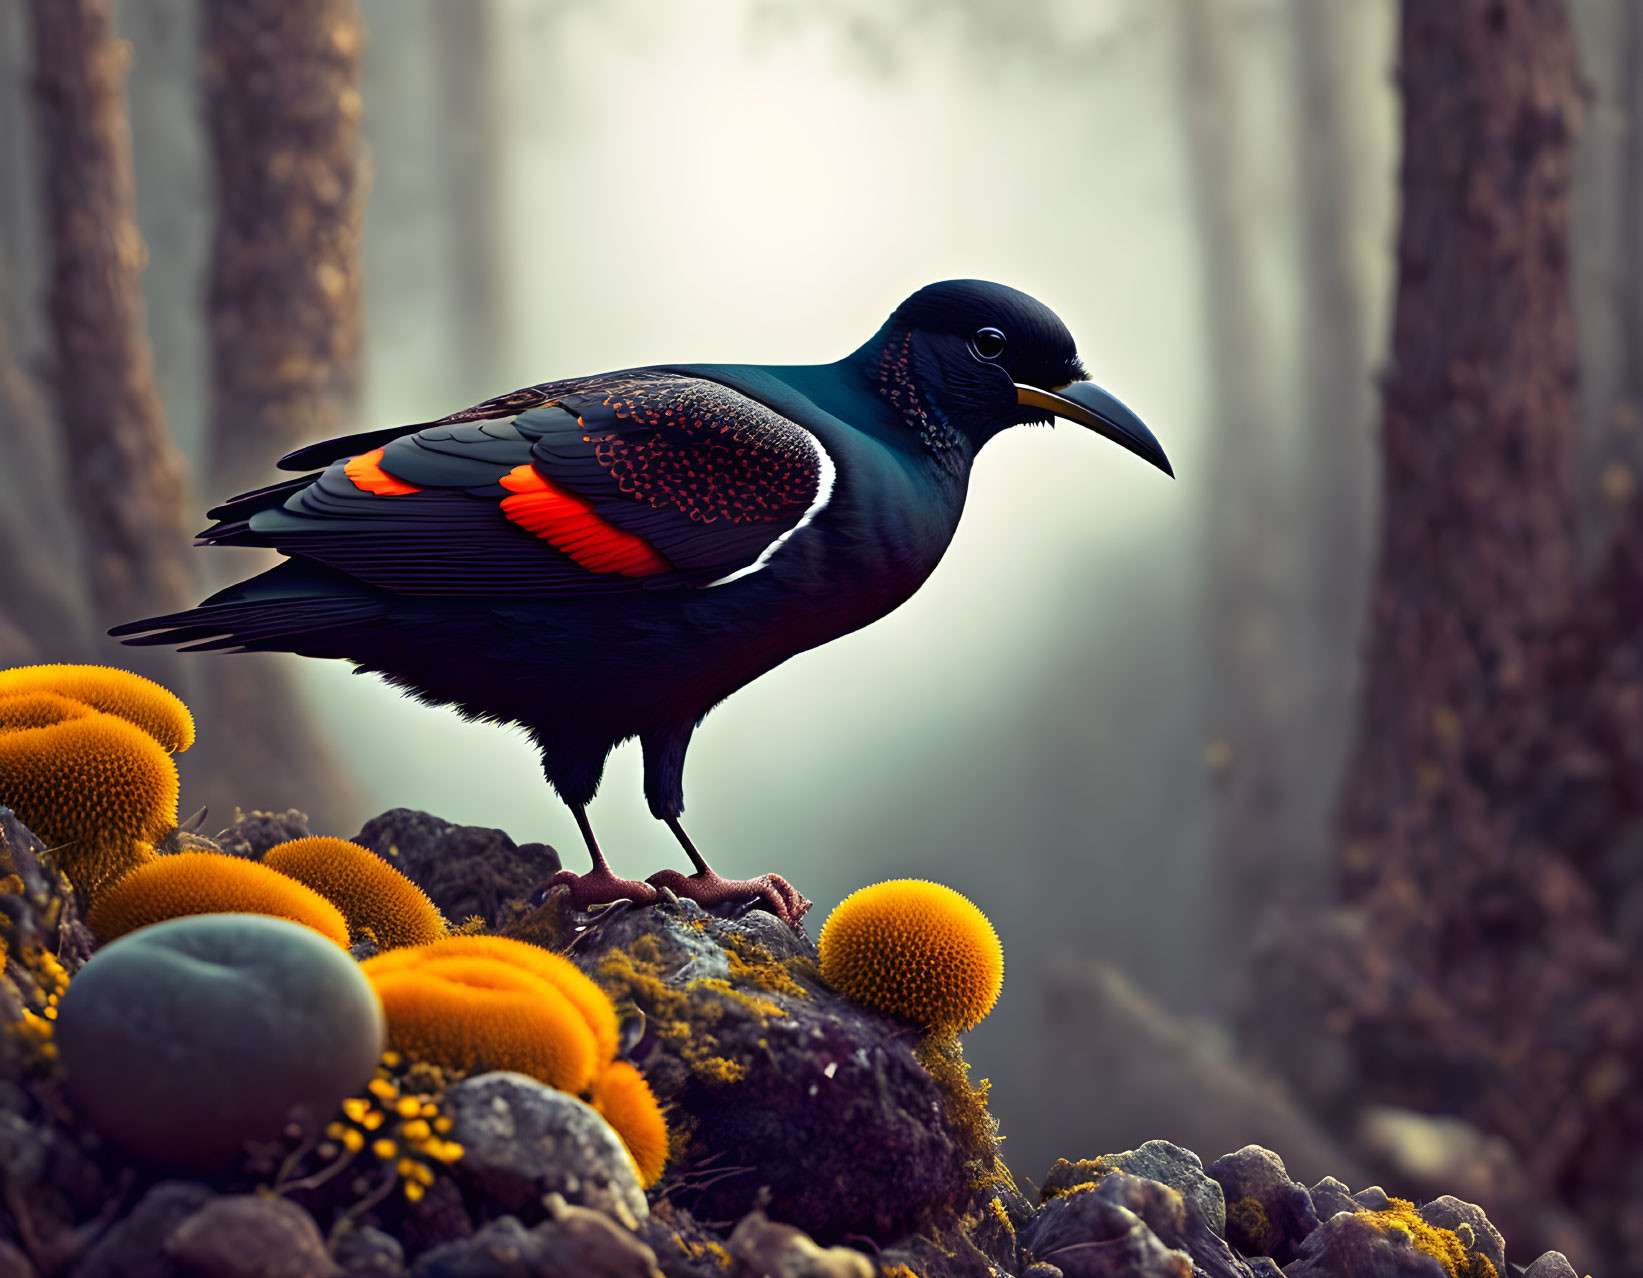 Colorful Starling Perched on Mossy Branch with Orange Mushrooms